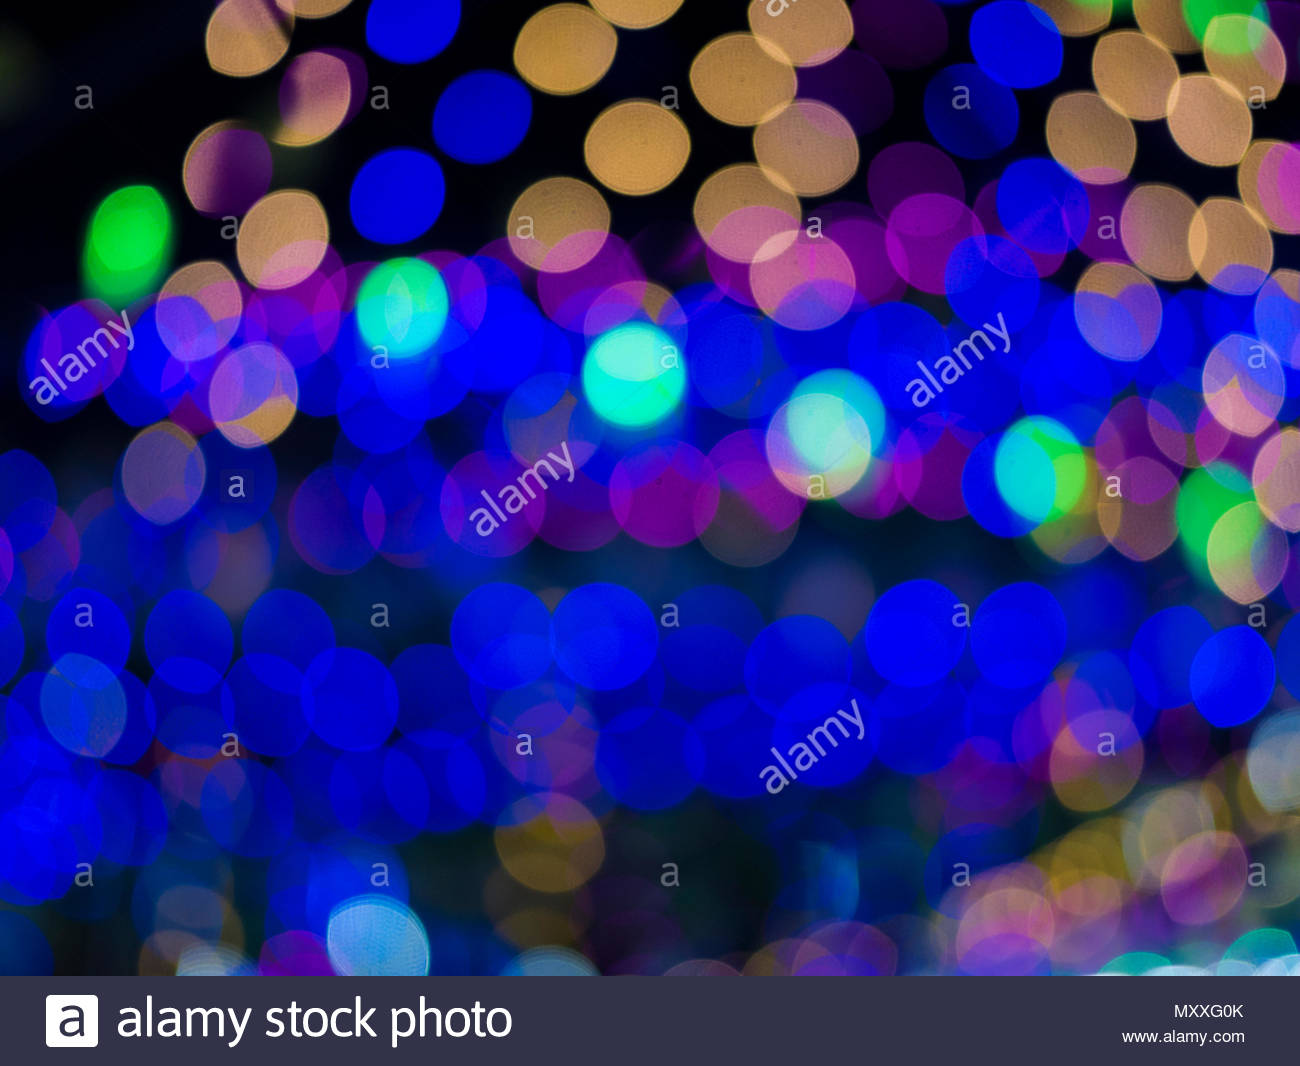 Abstract Image Of Unfocused Multicolored Lights Shining In The